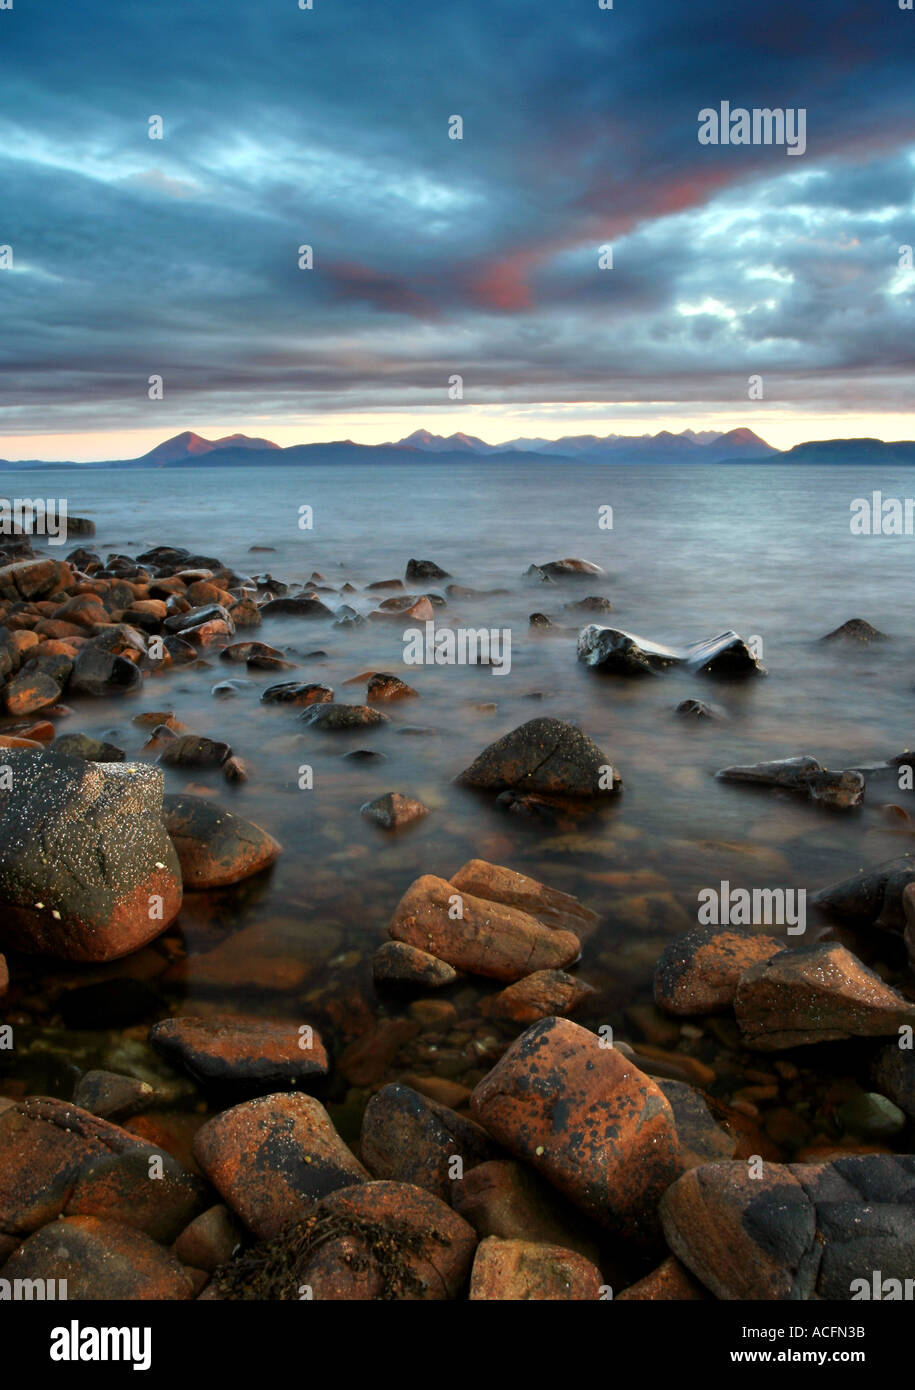 The Cuillin mountain range in soft dusk light from Applecross bay with crustacean covered rocks in the foreground Stock Photo